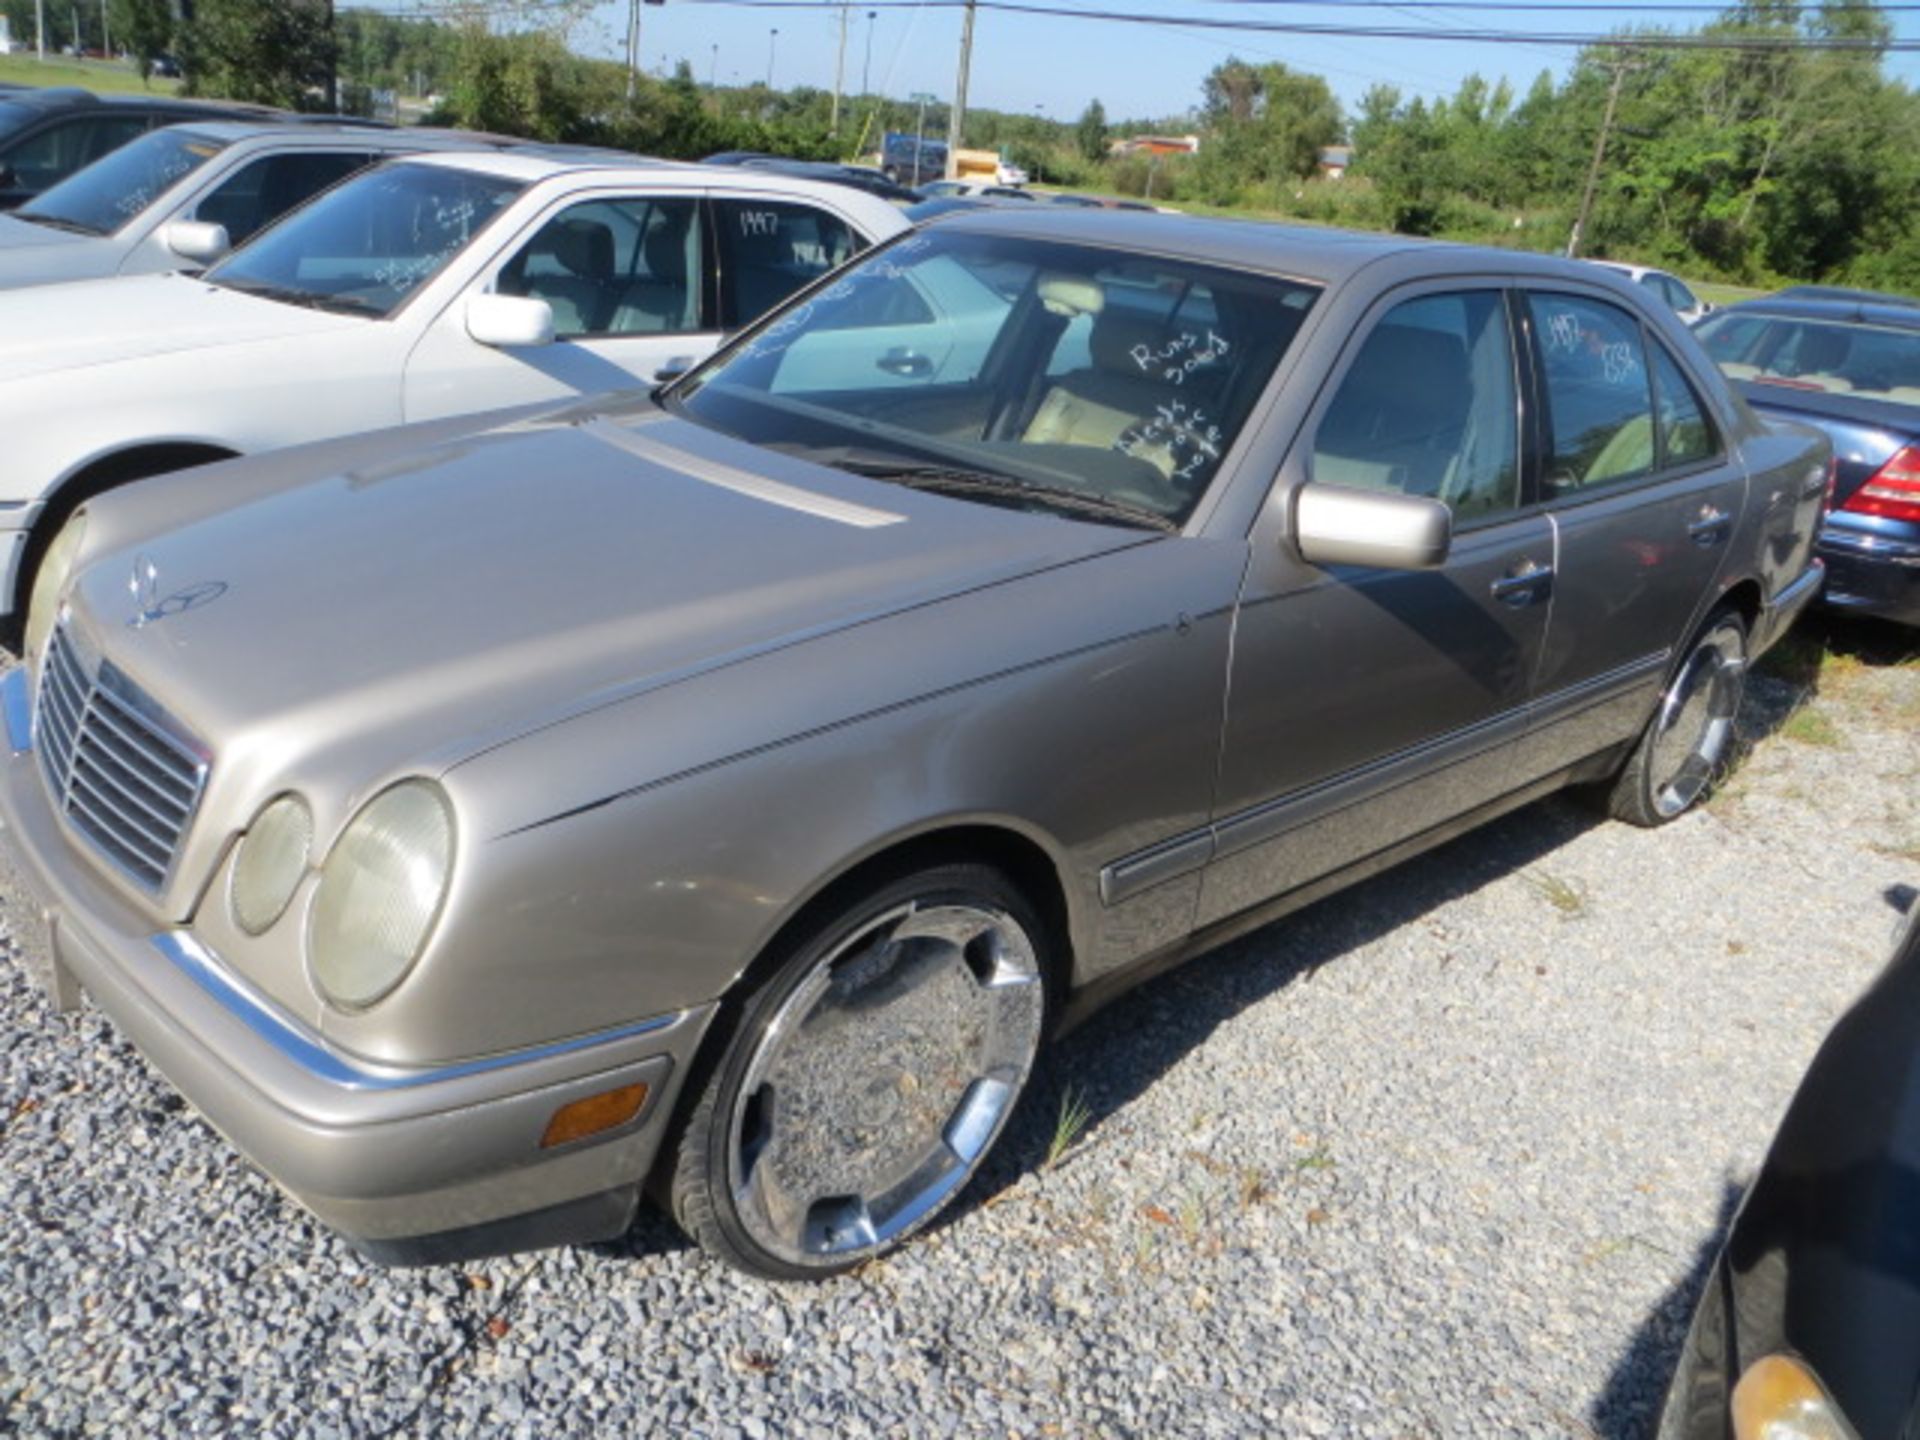 1997 Mercedes Benz E420-NEEDS HEATER HOSE 189000 MILES,VIN WDBJF72F8VA305016, SOLD WITH GOOD TRANSFE - Image 2 of 4